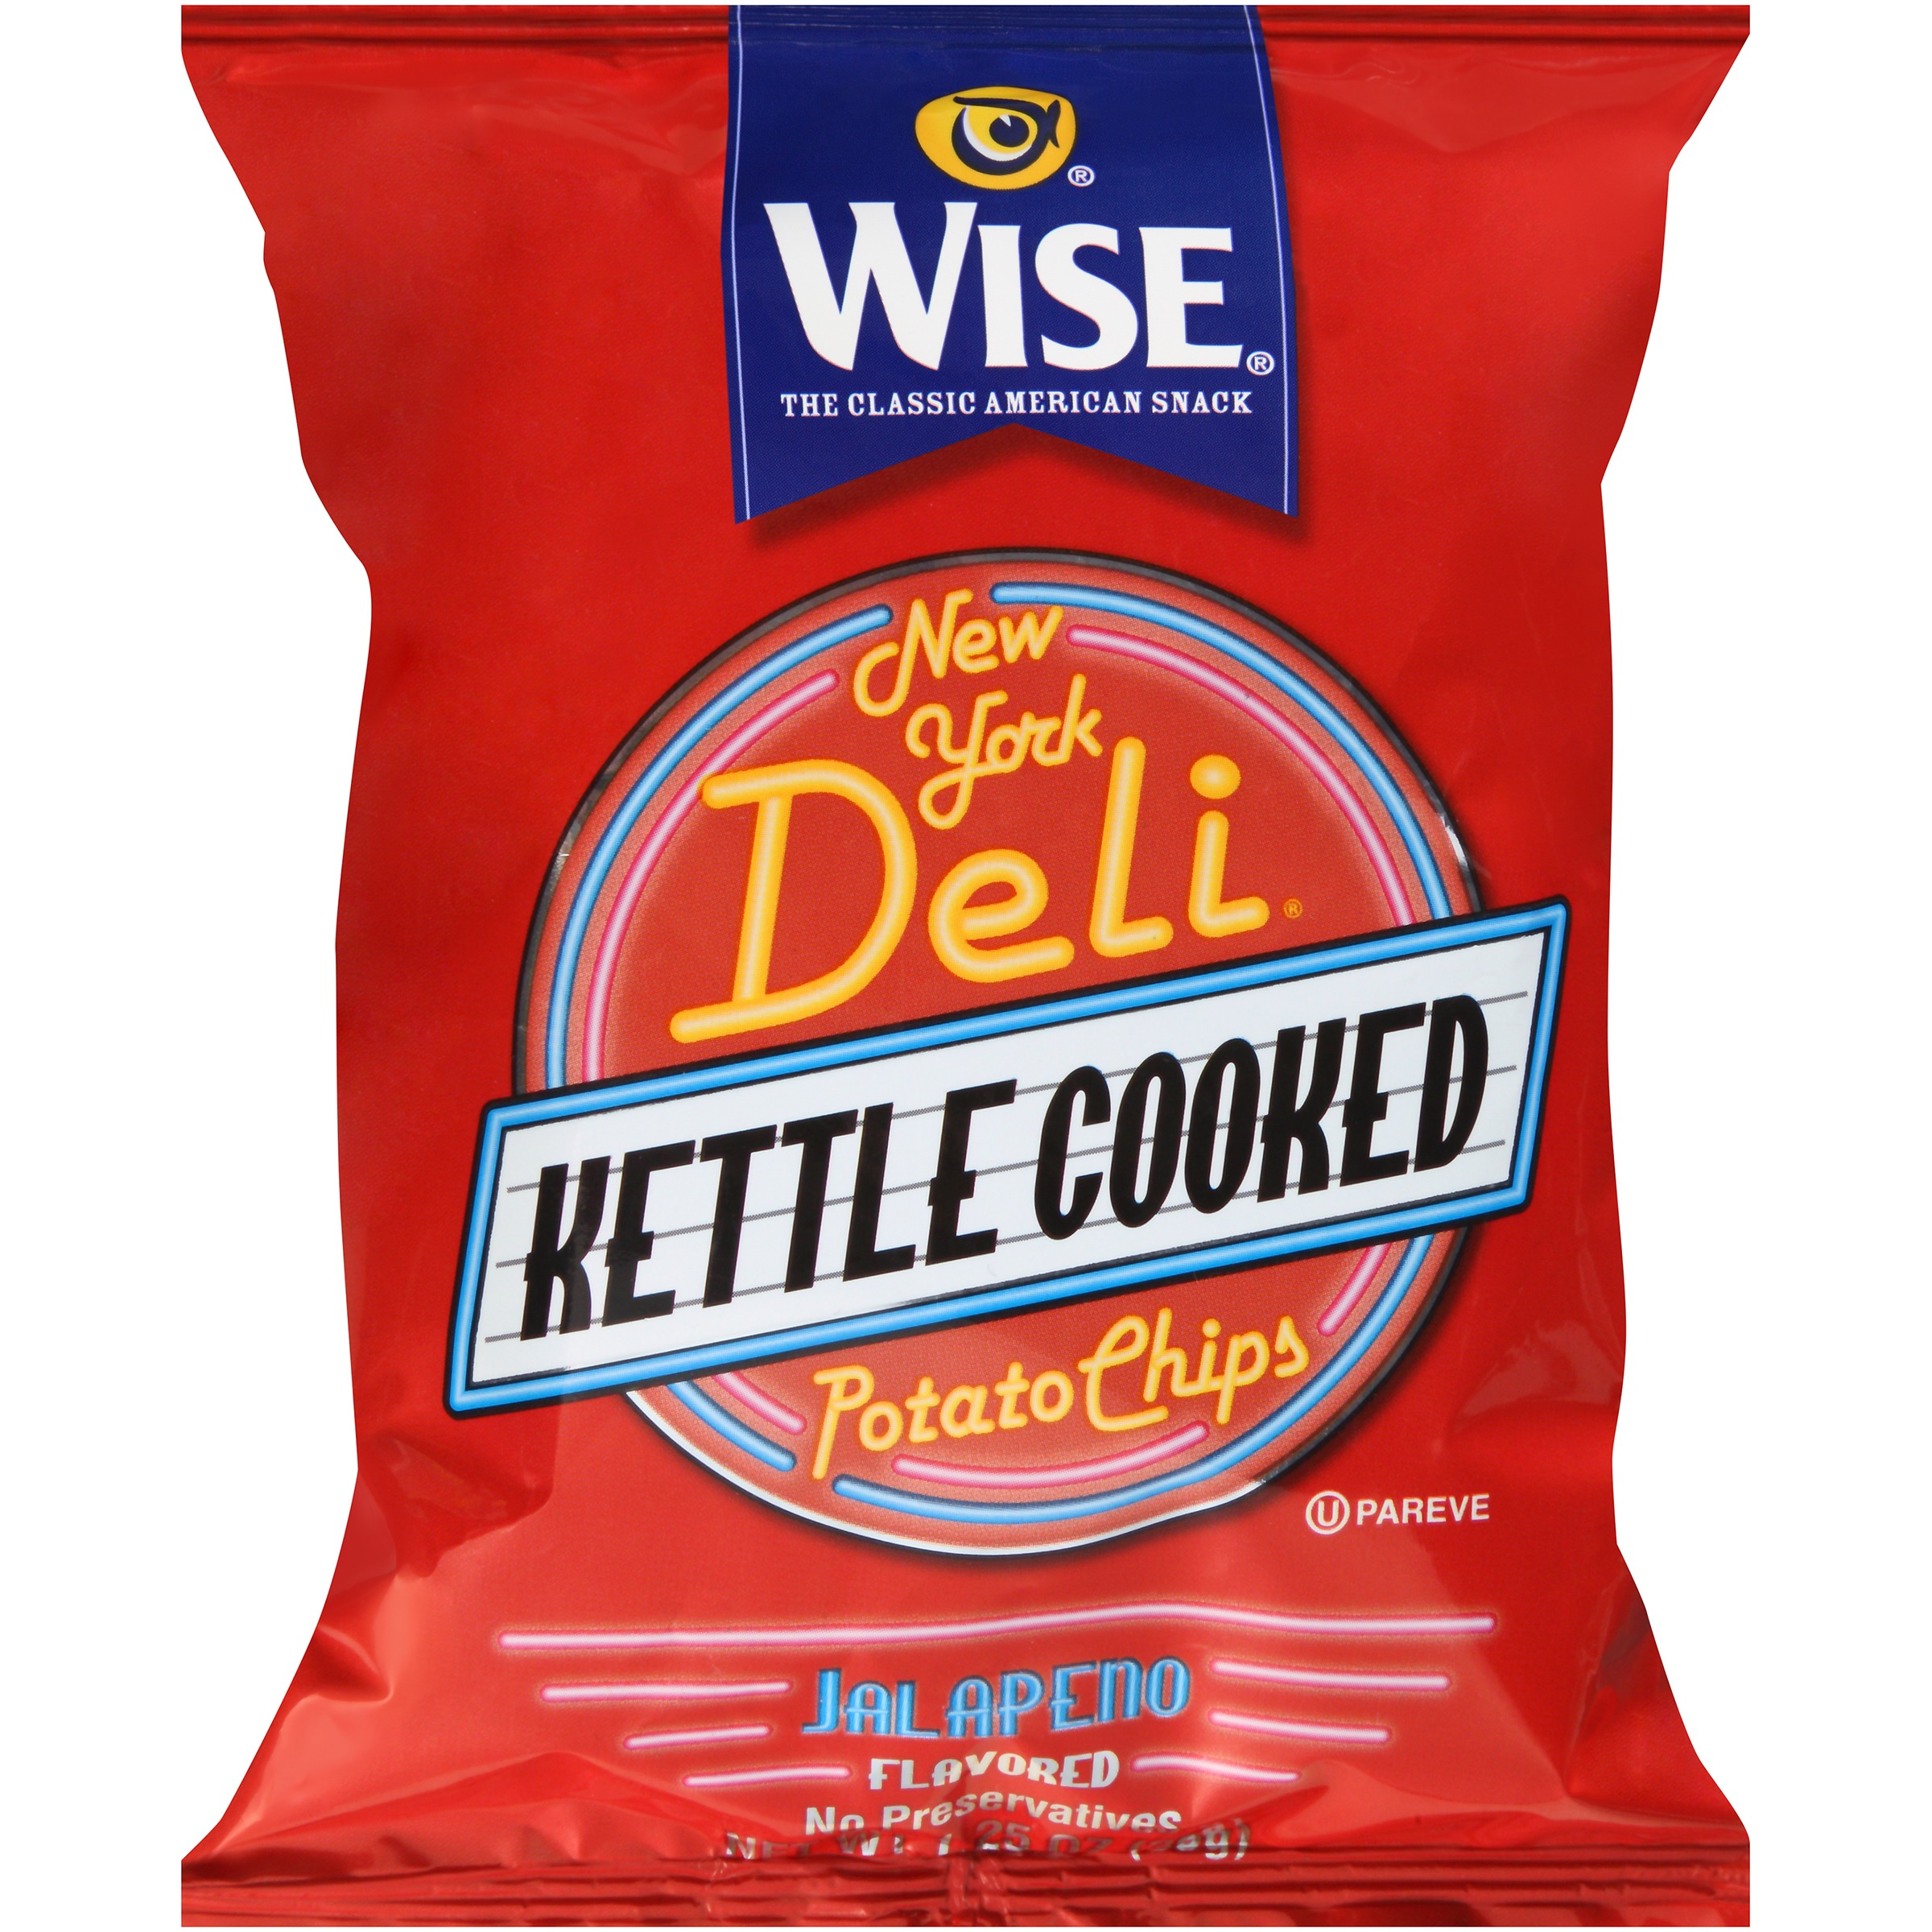 WISE KETTLE COOKED POTATO CHIPS 1.25 OZ